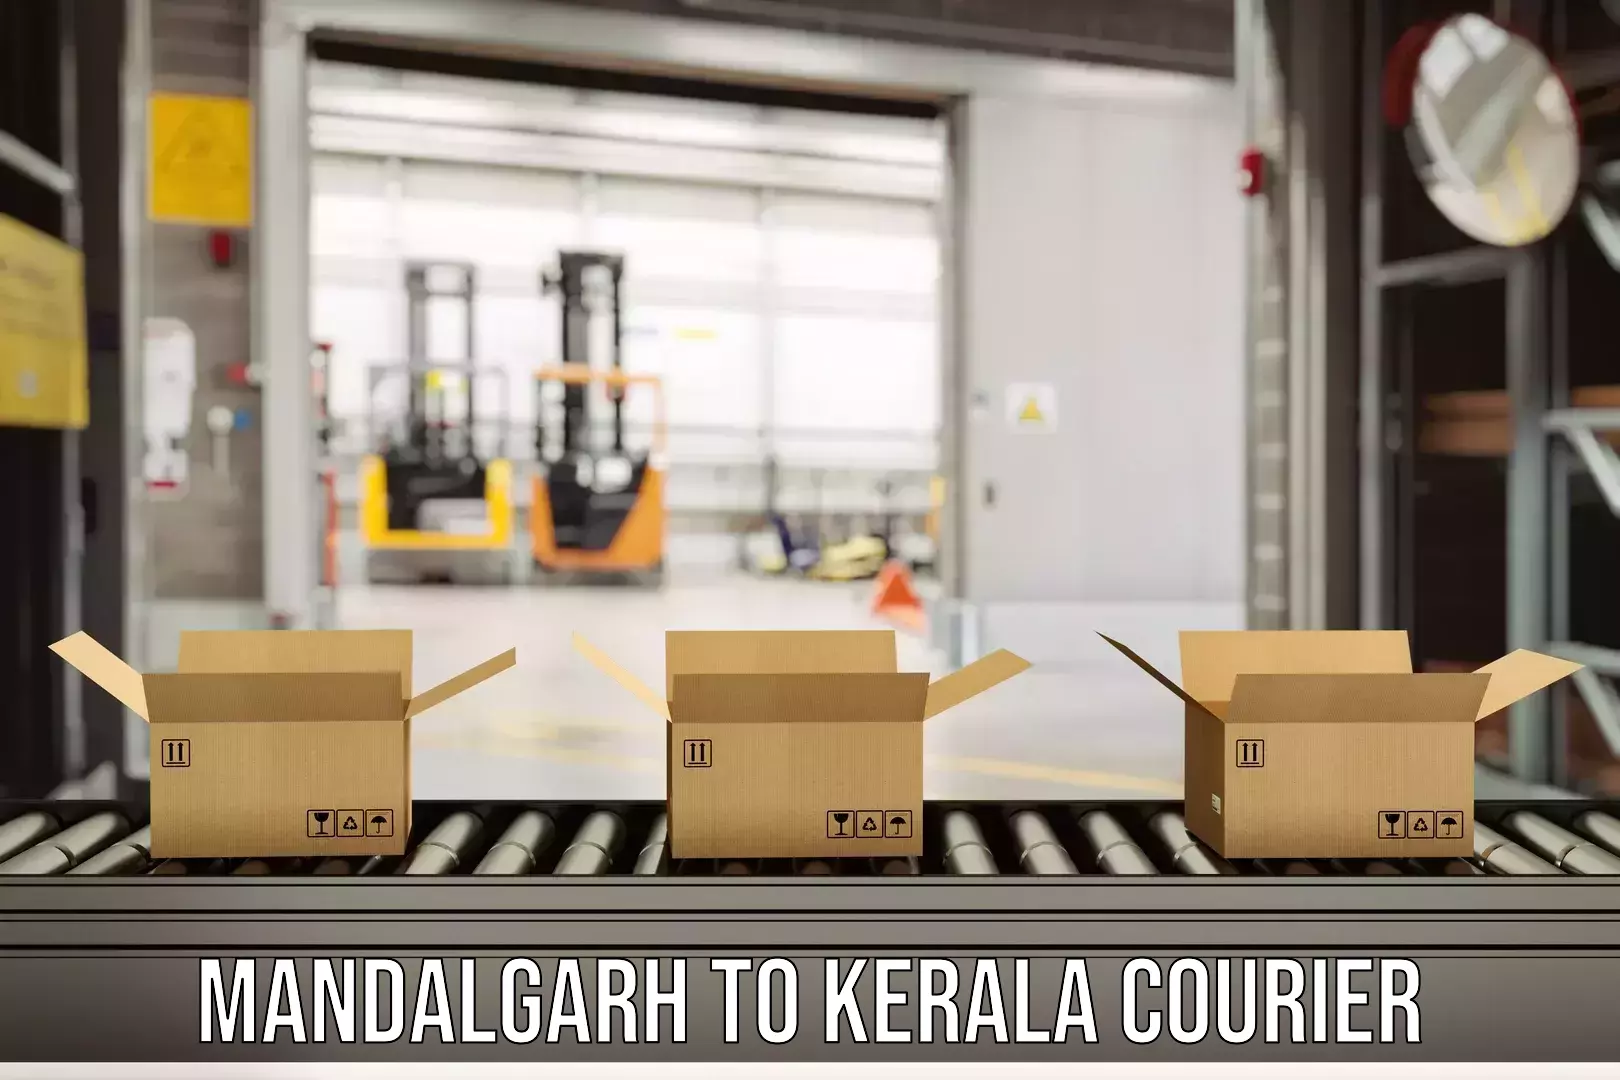 Digital courier platforms Mandalgarh to Cochin University of Science and Technology